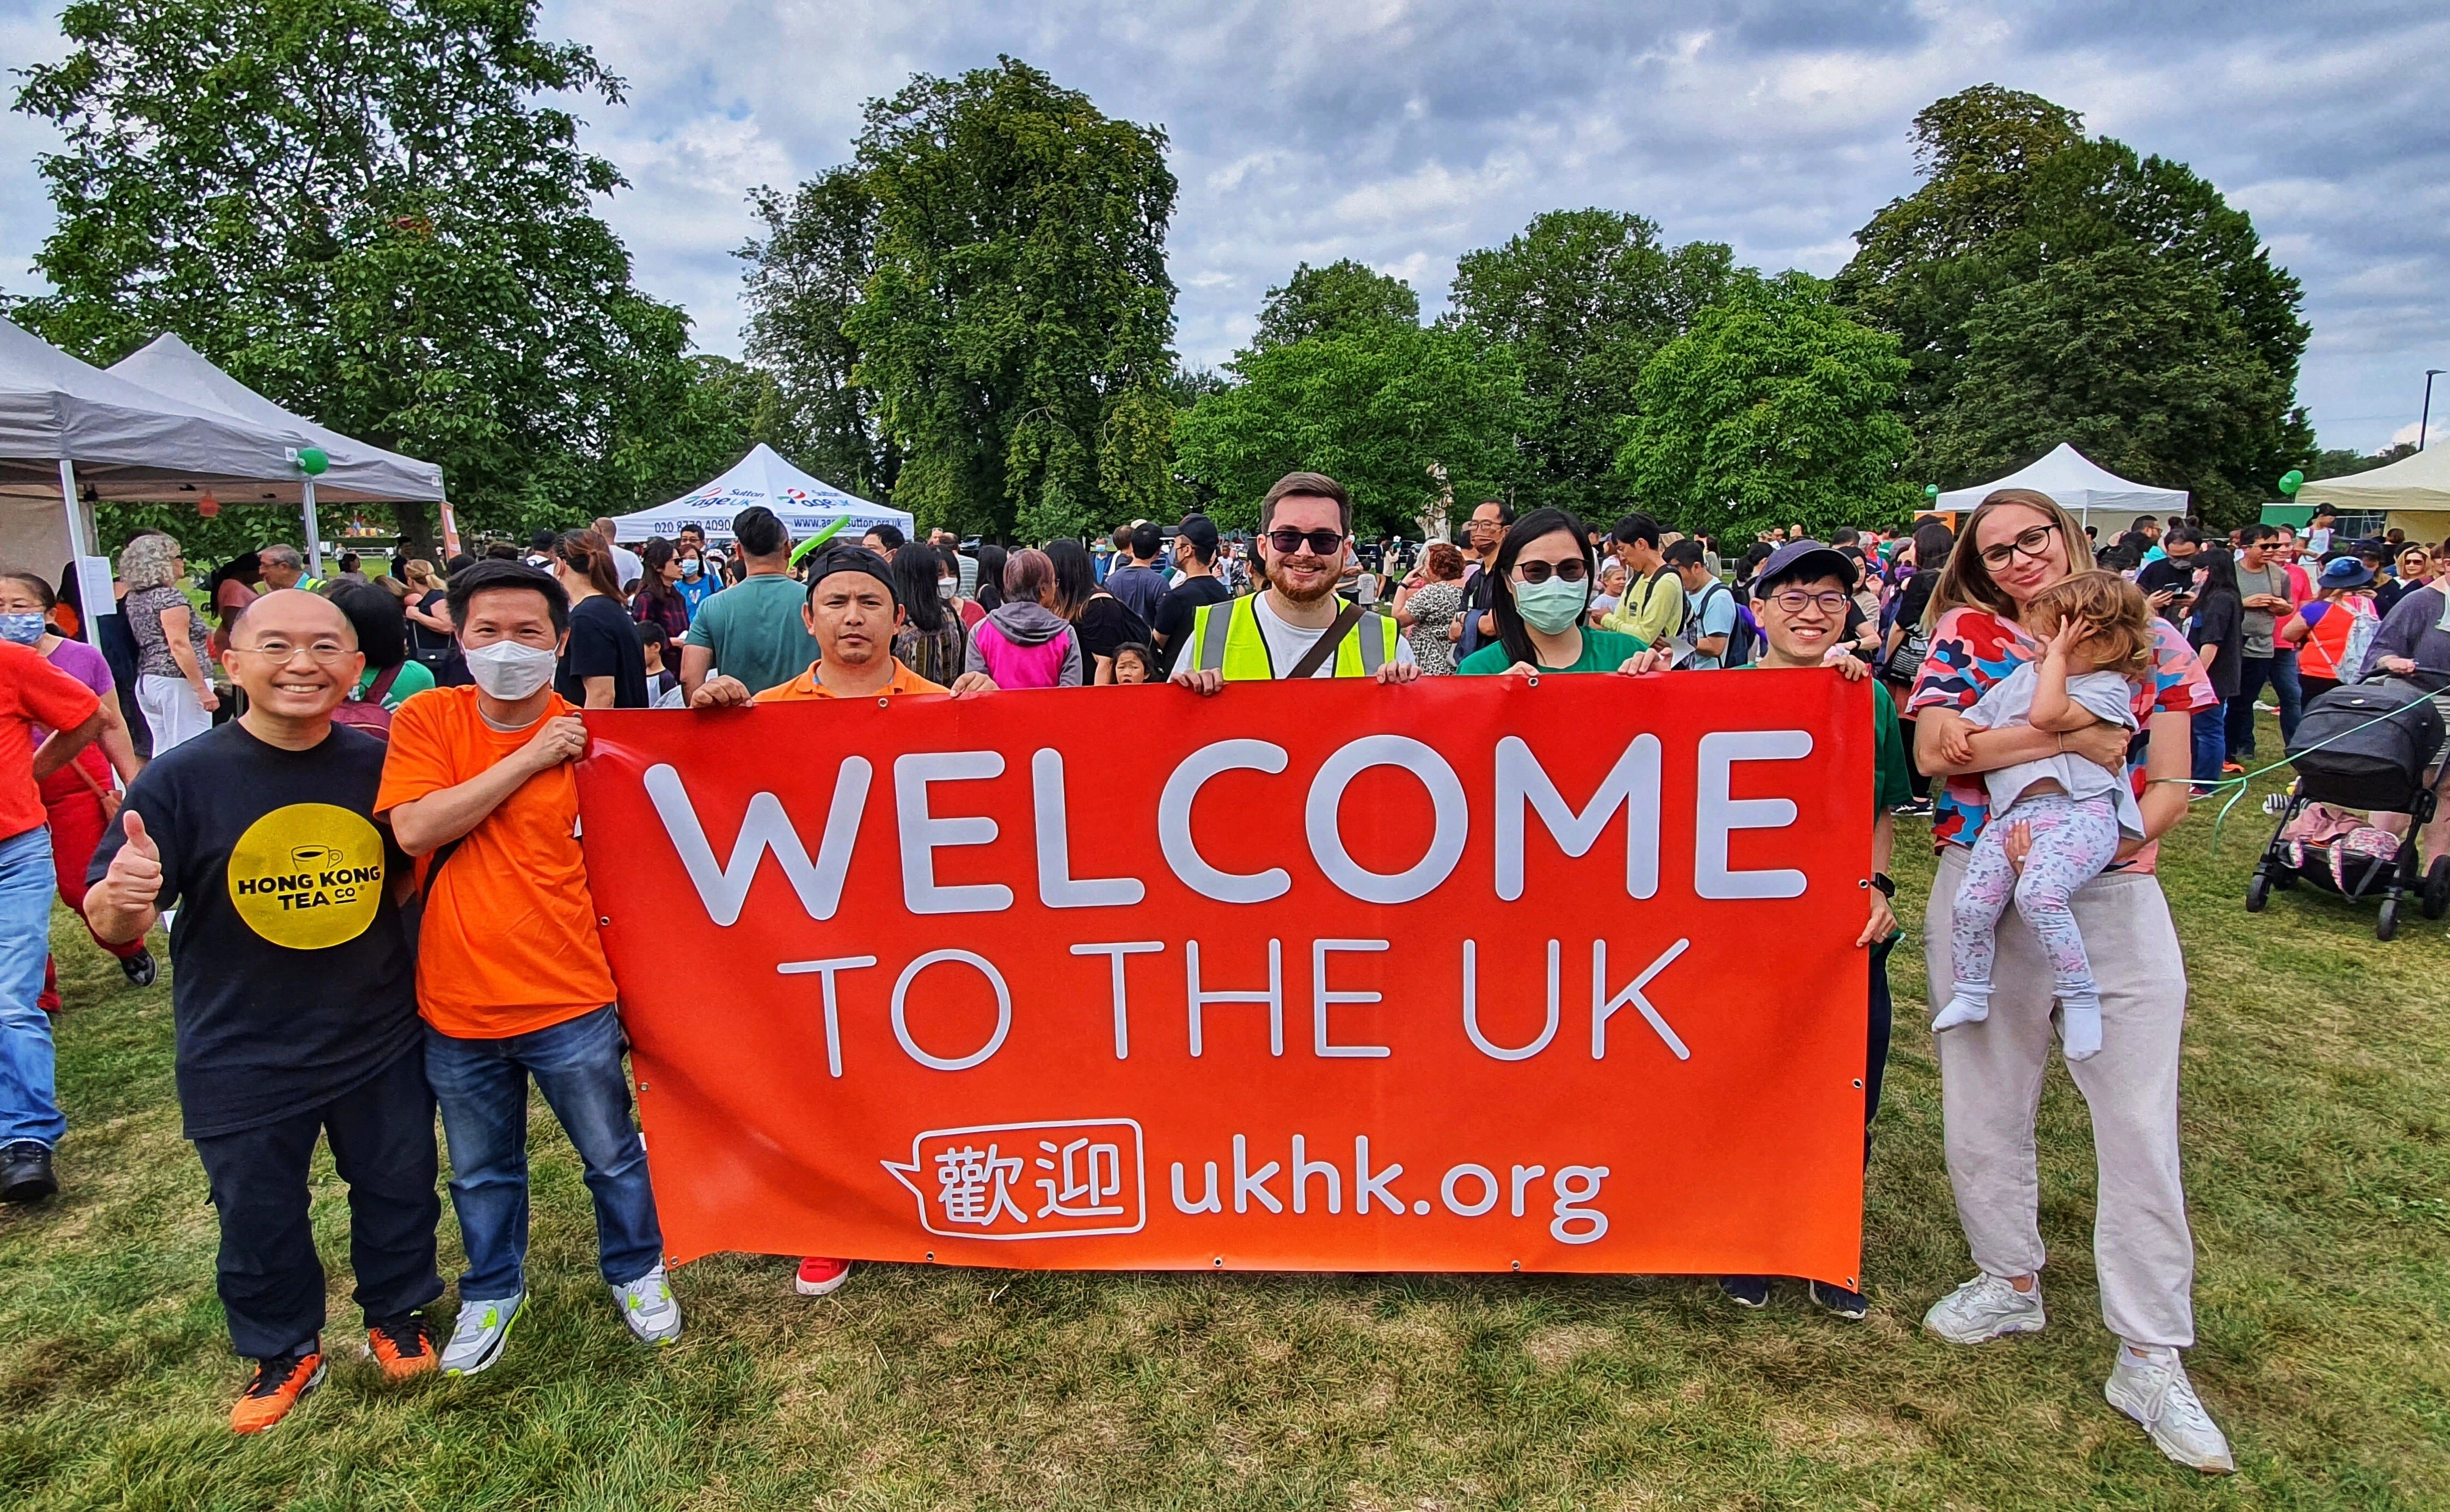 The Friendship Festival was held to welcome newcomers from Hong Kong to the London borough of Sutton. Photo: Handout